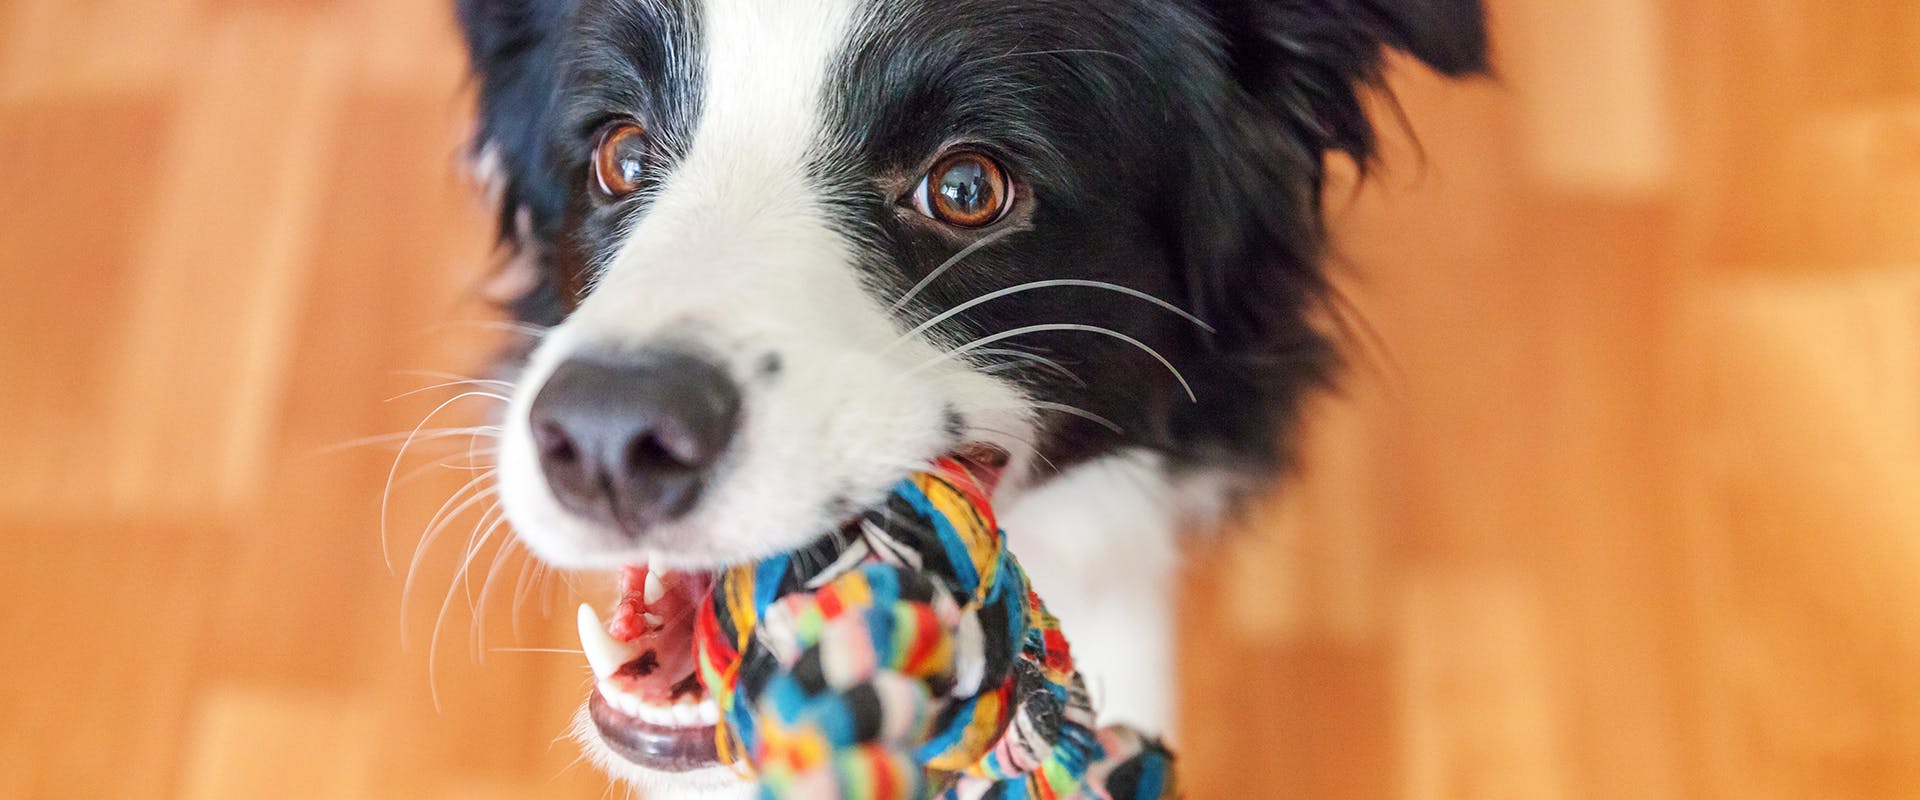 A Collie dog playing with a toy